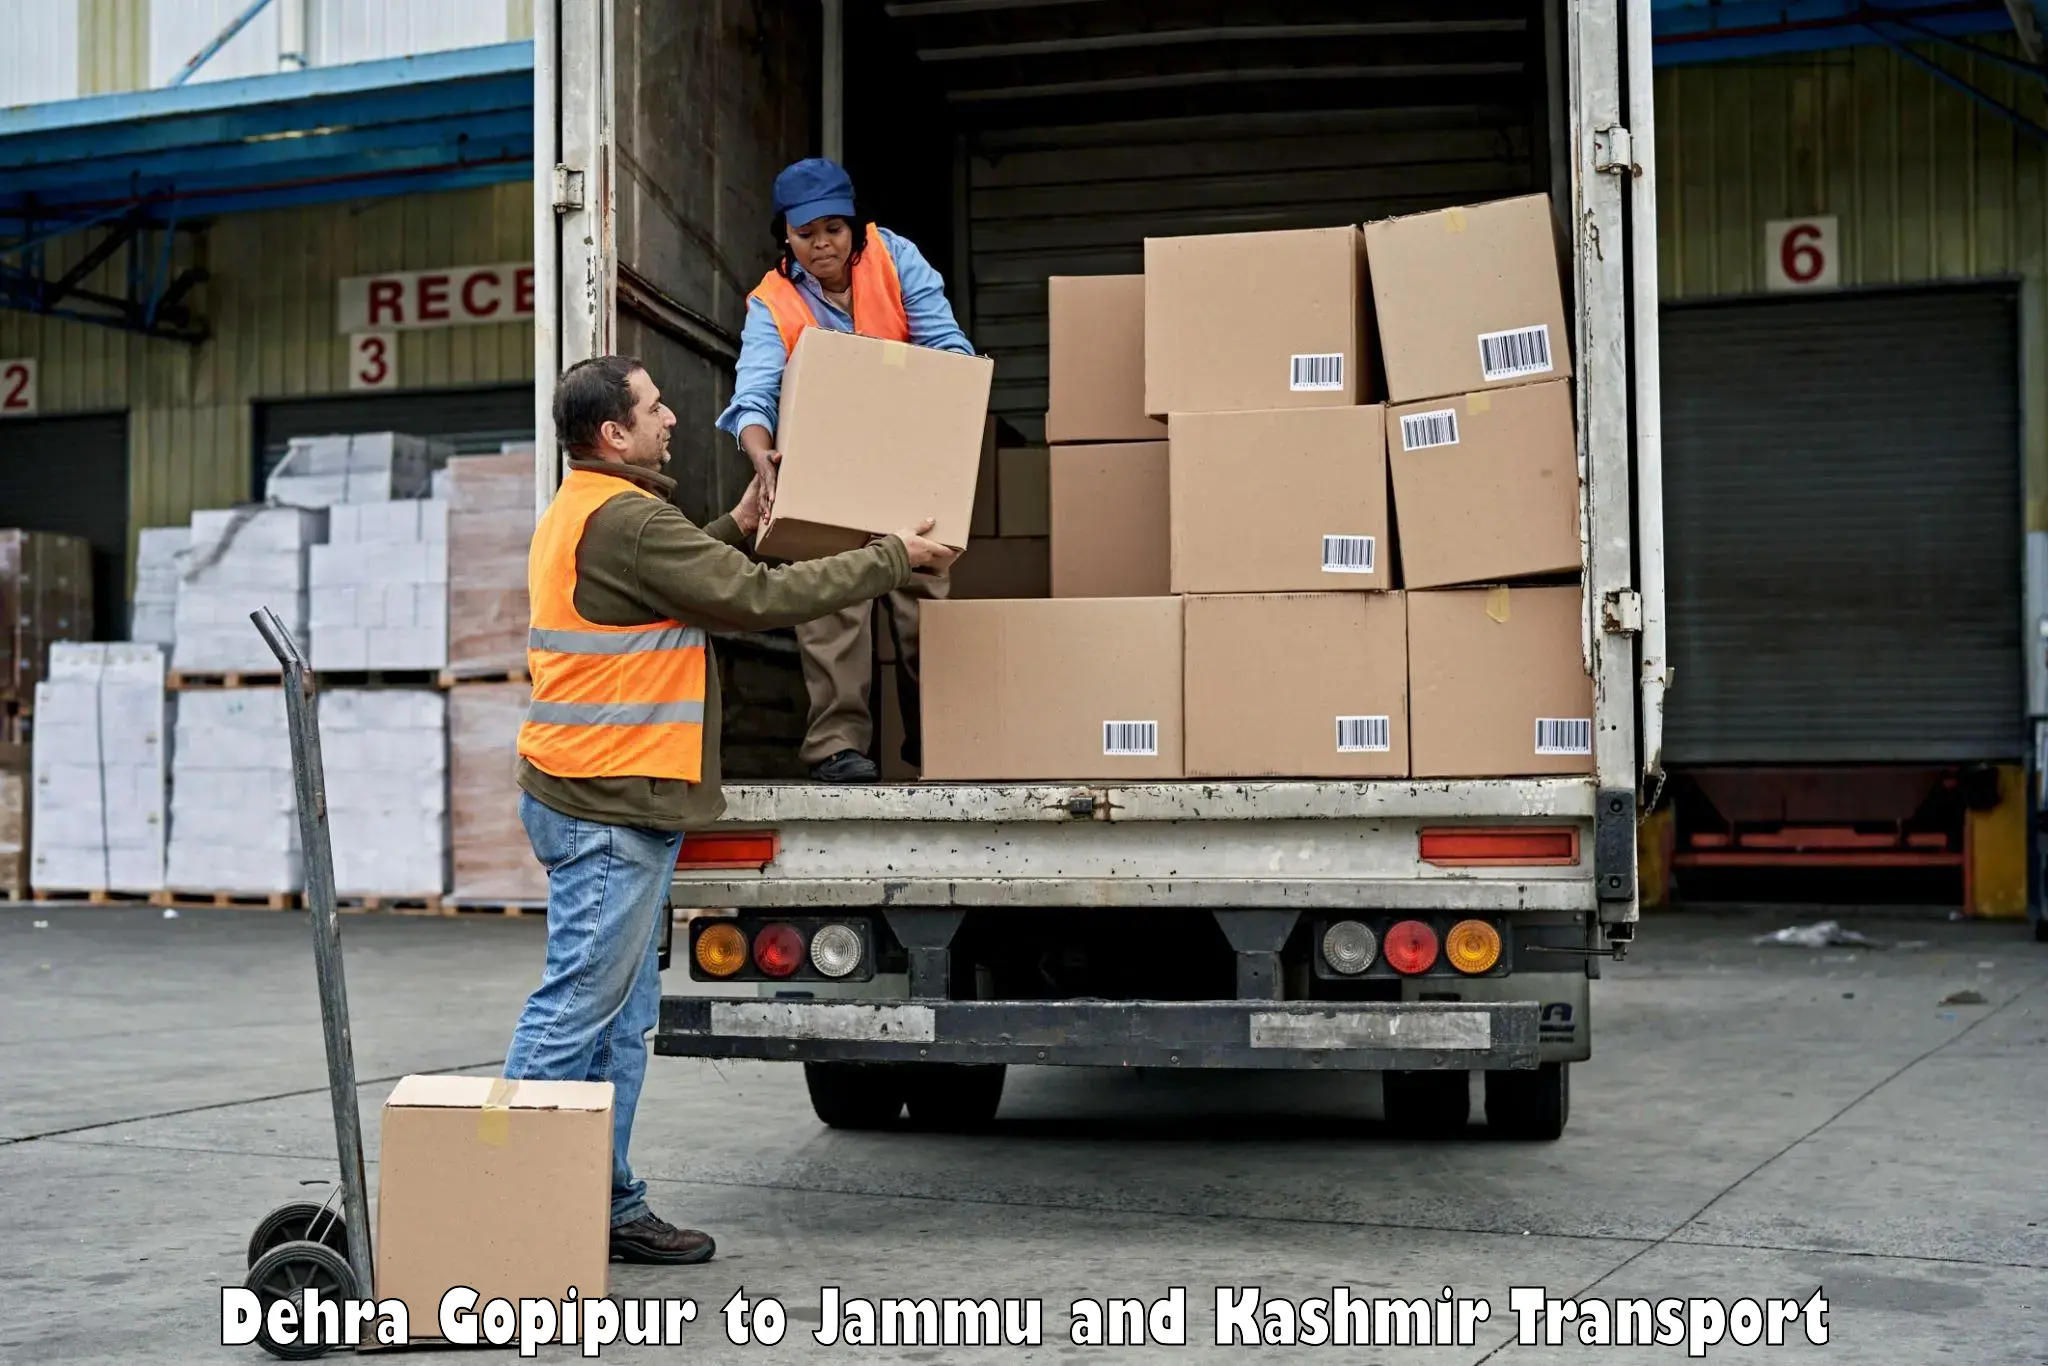 Goods delivery service Dehra Gopipur to Leh